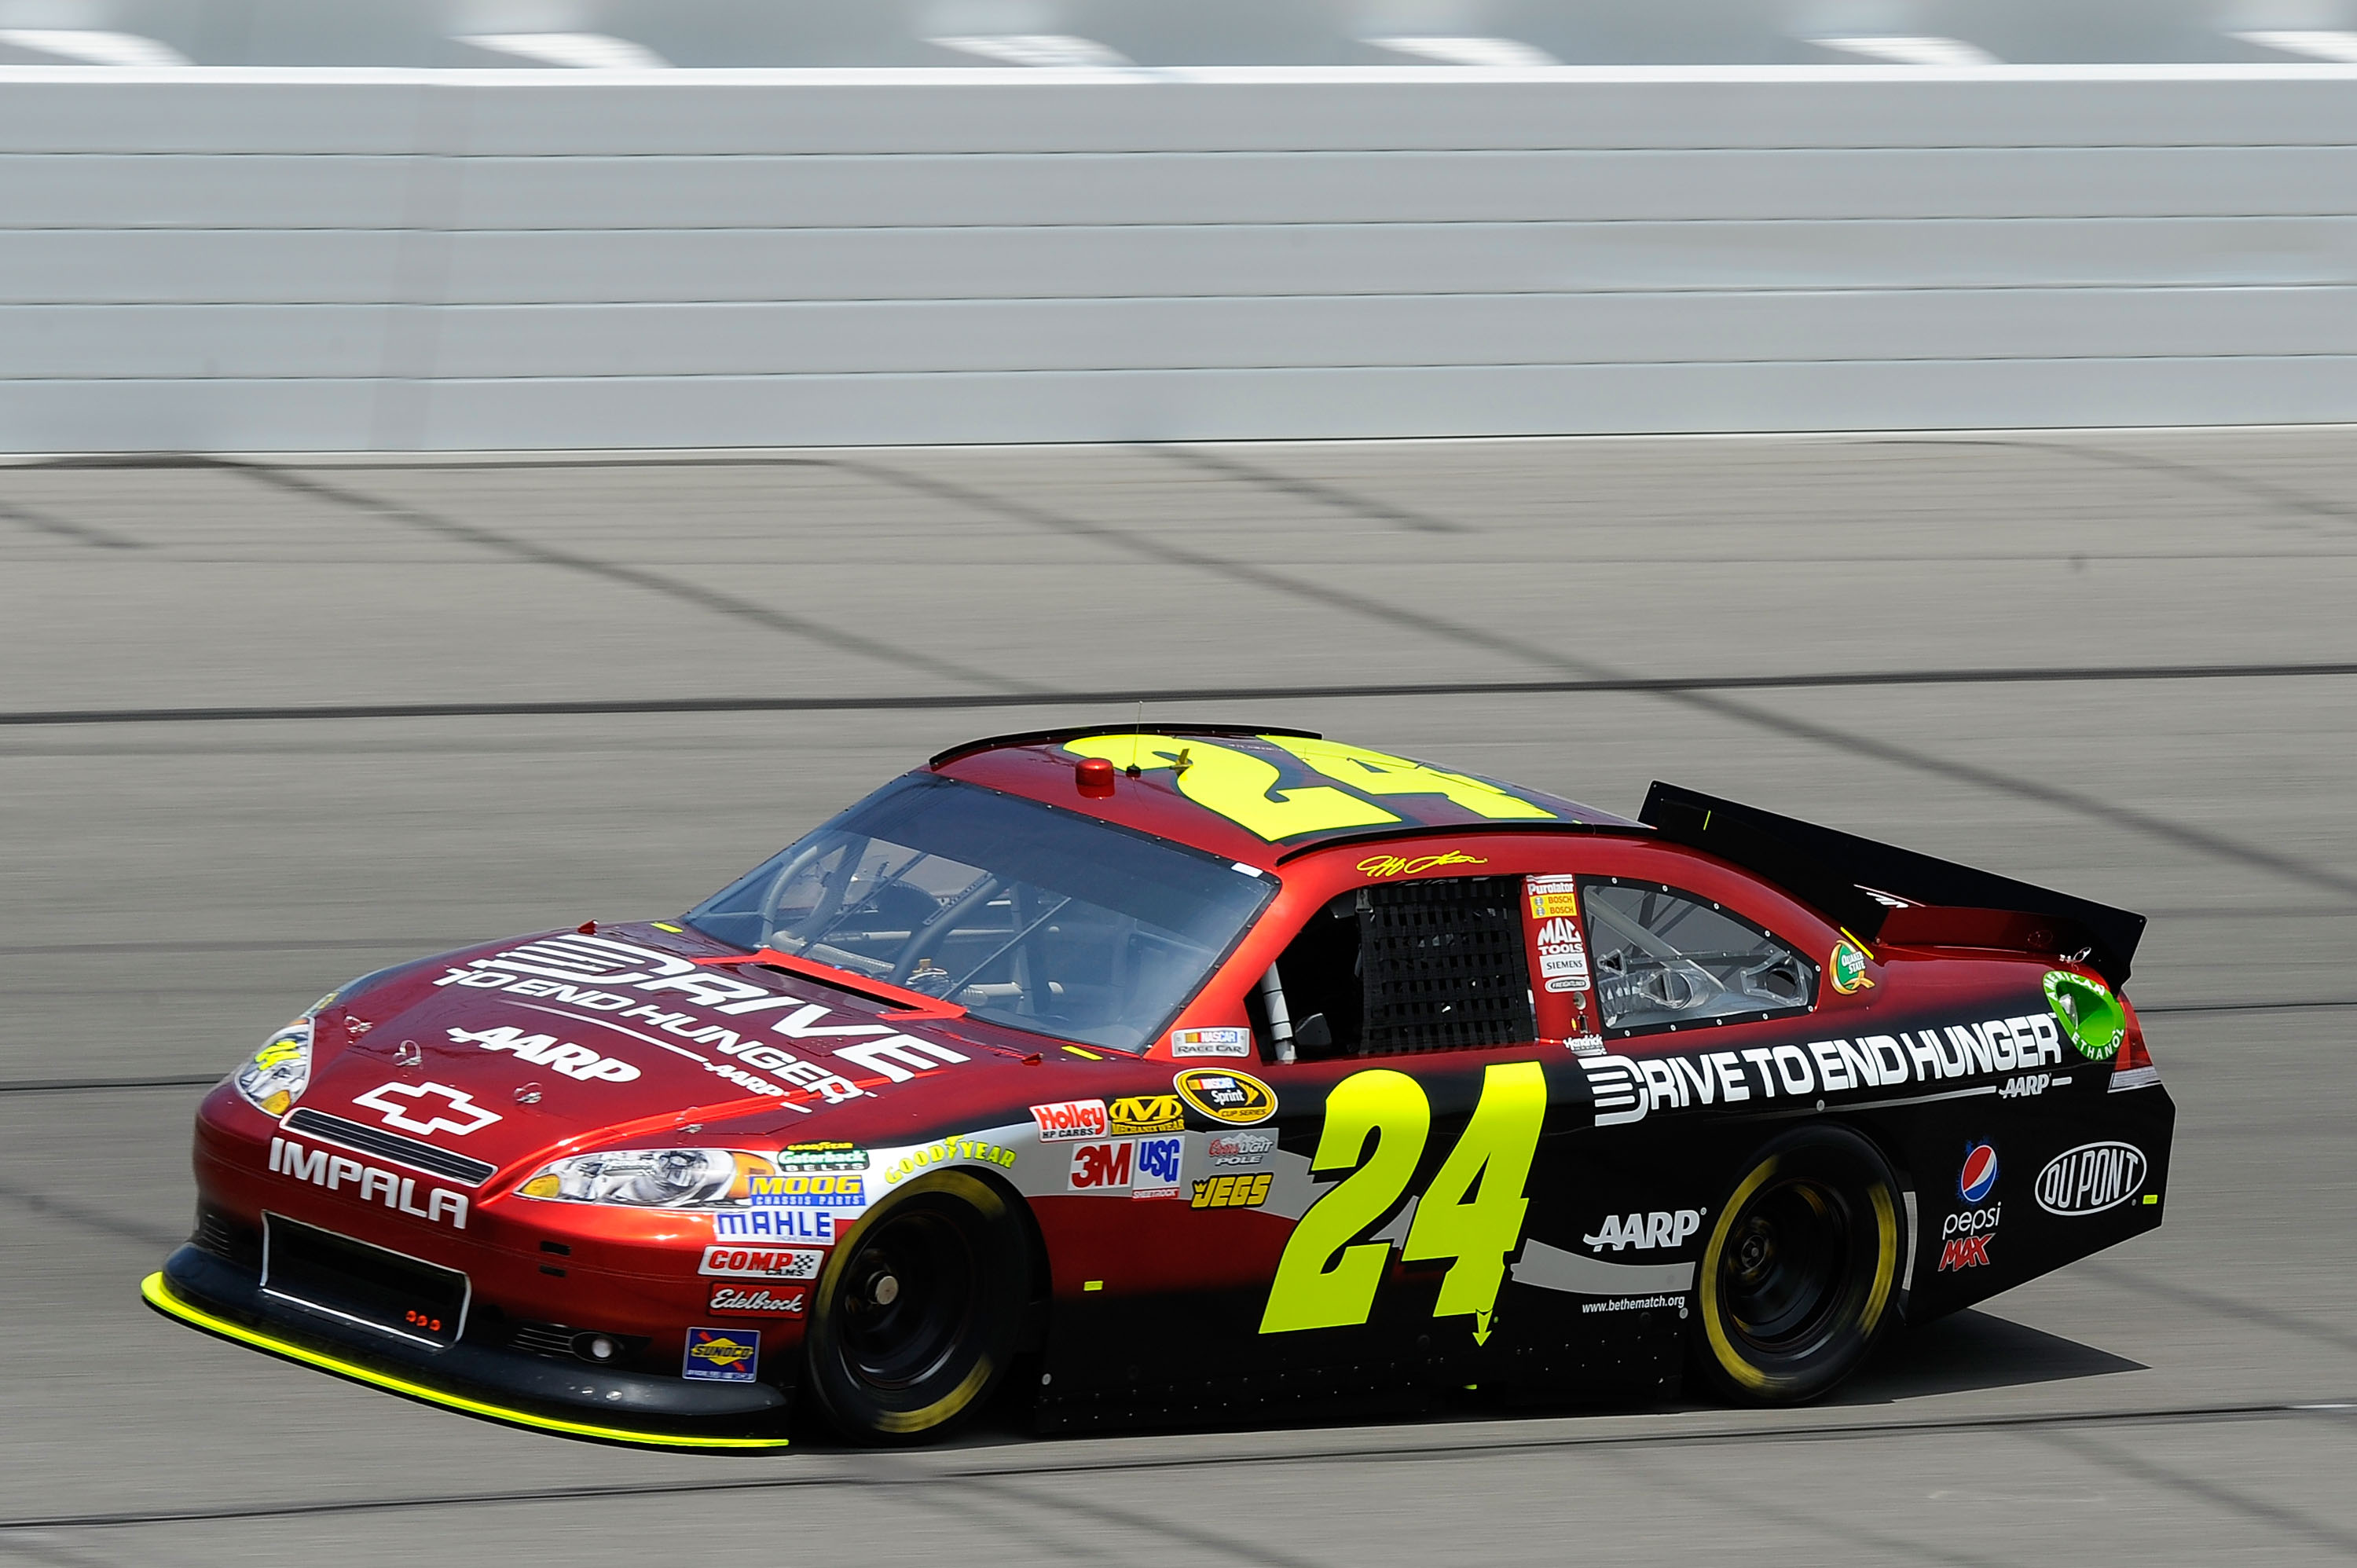 KANSAS CITY, KS - JUNE 03:  Jeff Gordon drives the #24 Drive to End Hunger Chevrolet during practice for the NASCAR Sprint Cup Series STP 400 at Kansas Speedway on June 3, 2011 in Kansas City, Kansas.  (Photo by Jared C. Tilton/Getty Images for NASCAR)